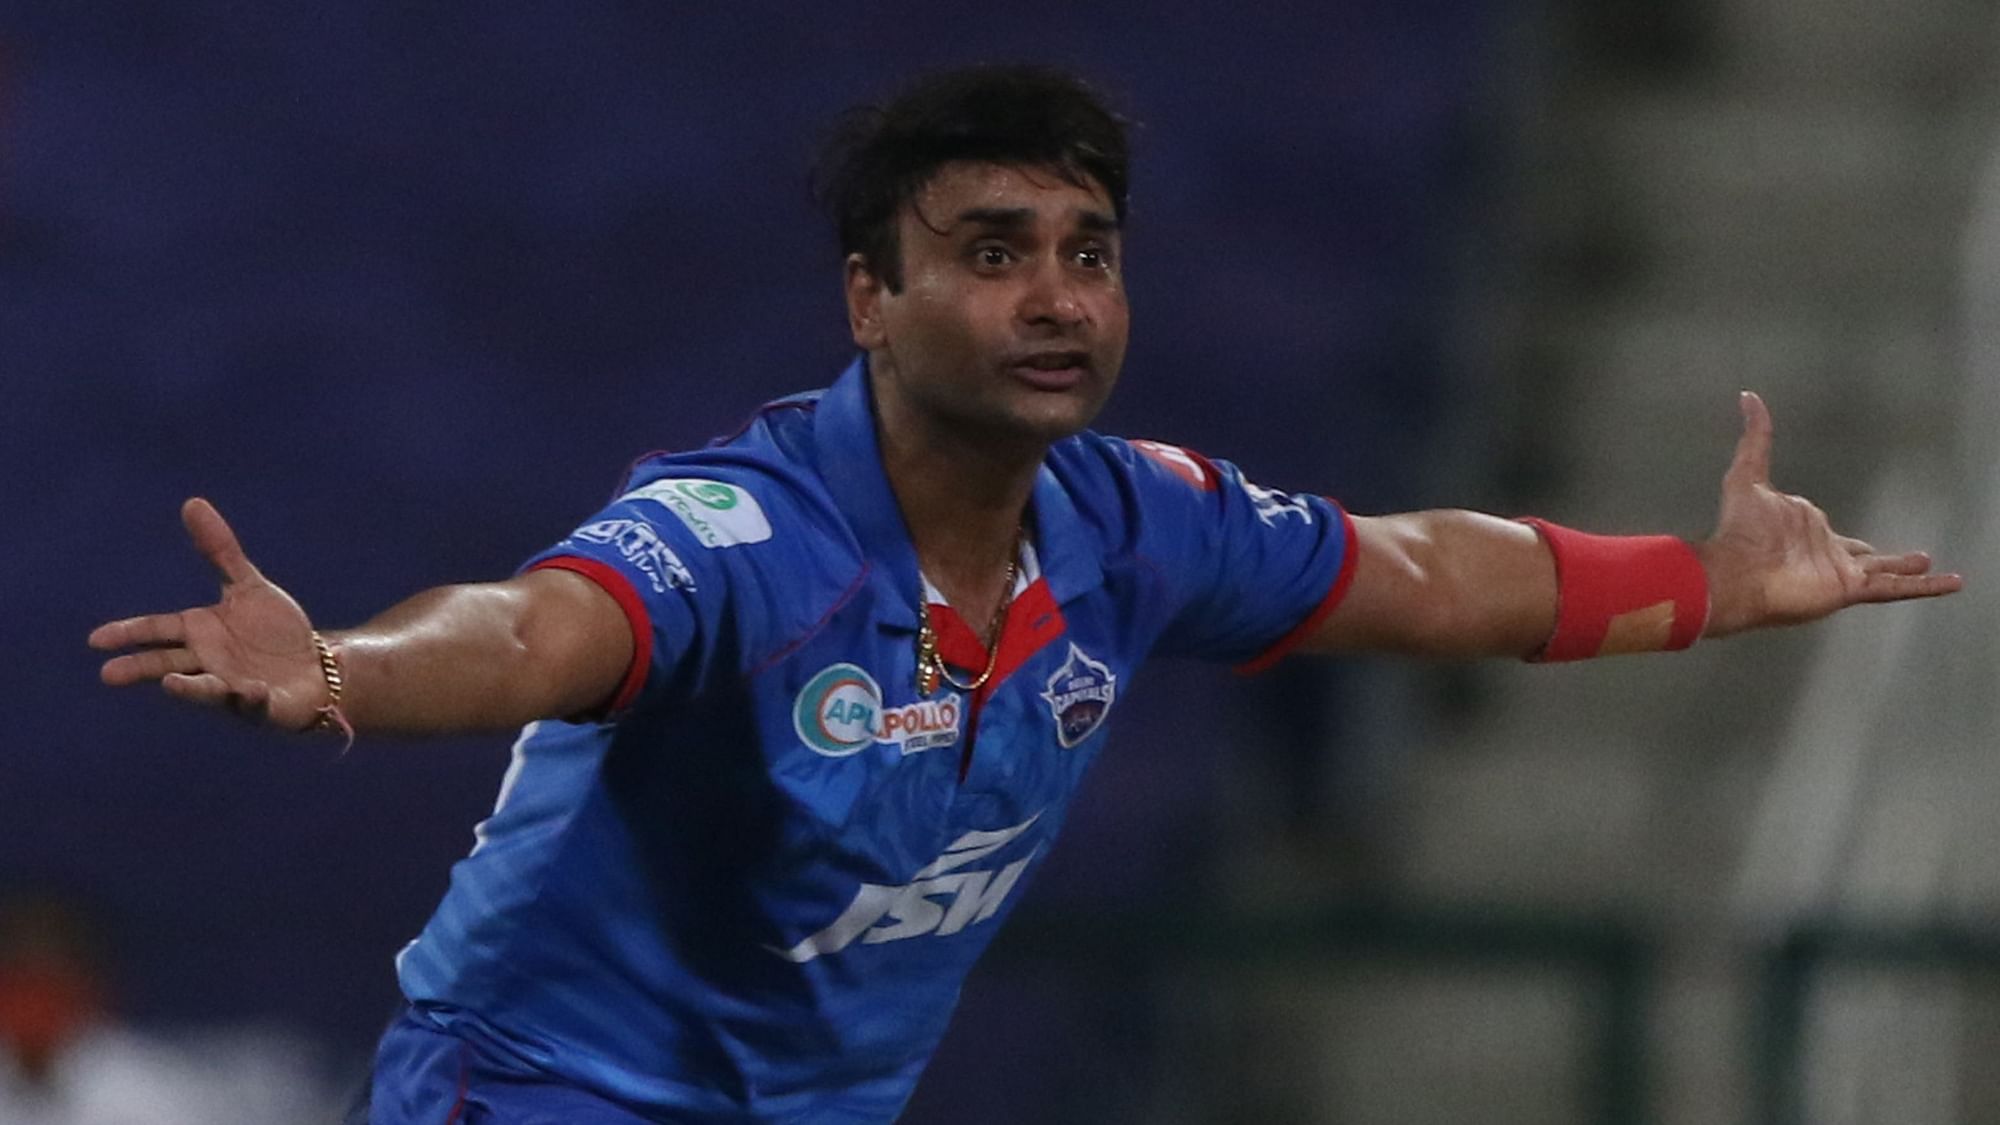 Delhi Capitals’ leg-spinner Amit Mishra couldn’t bowl his remaining overs after getting hit on the fingers during an IPL 2020 match against KKR.